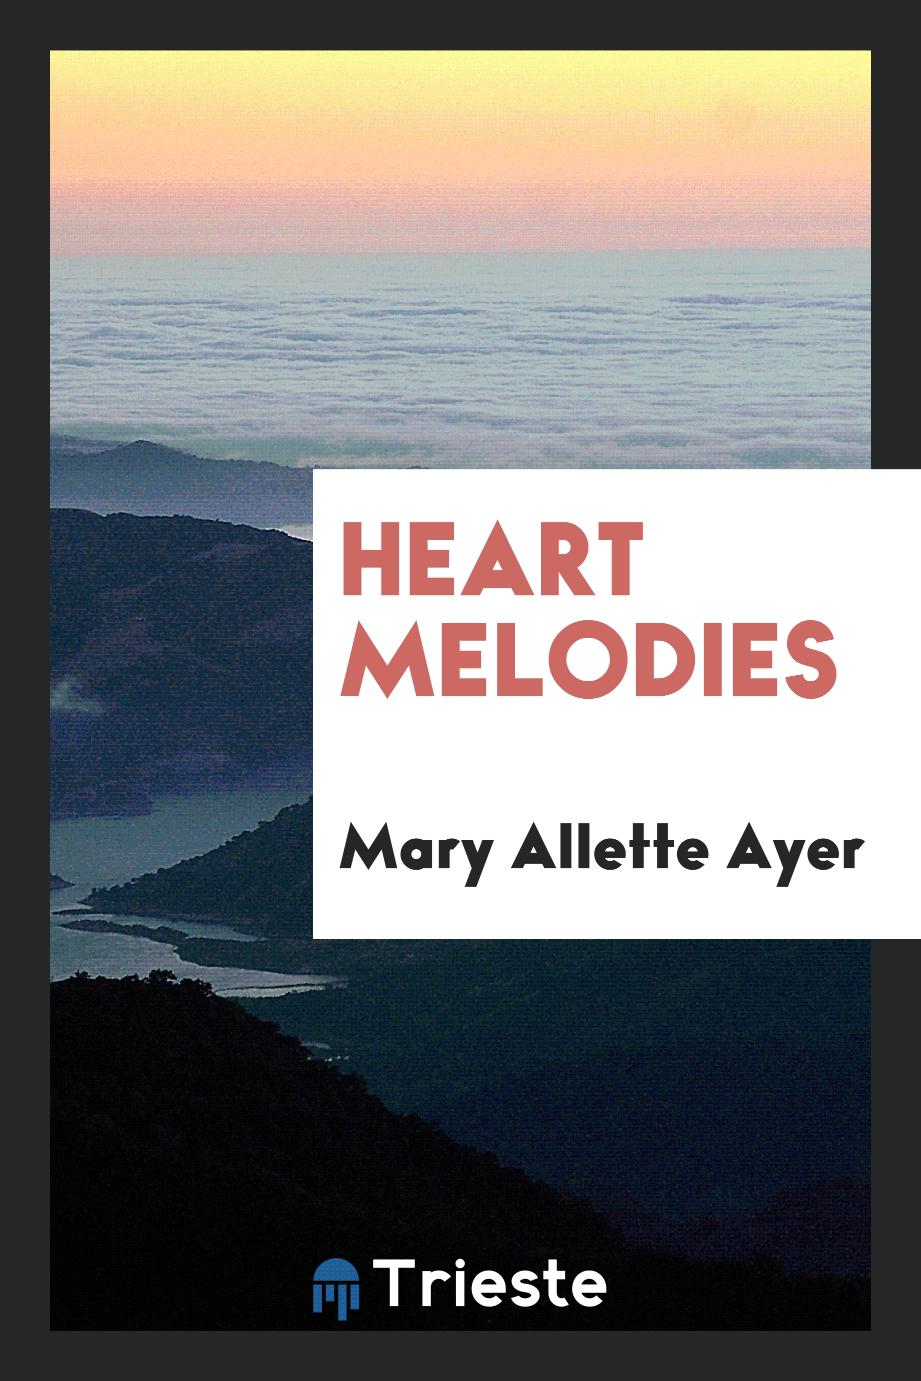 Heart melodies